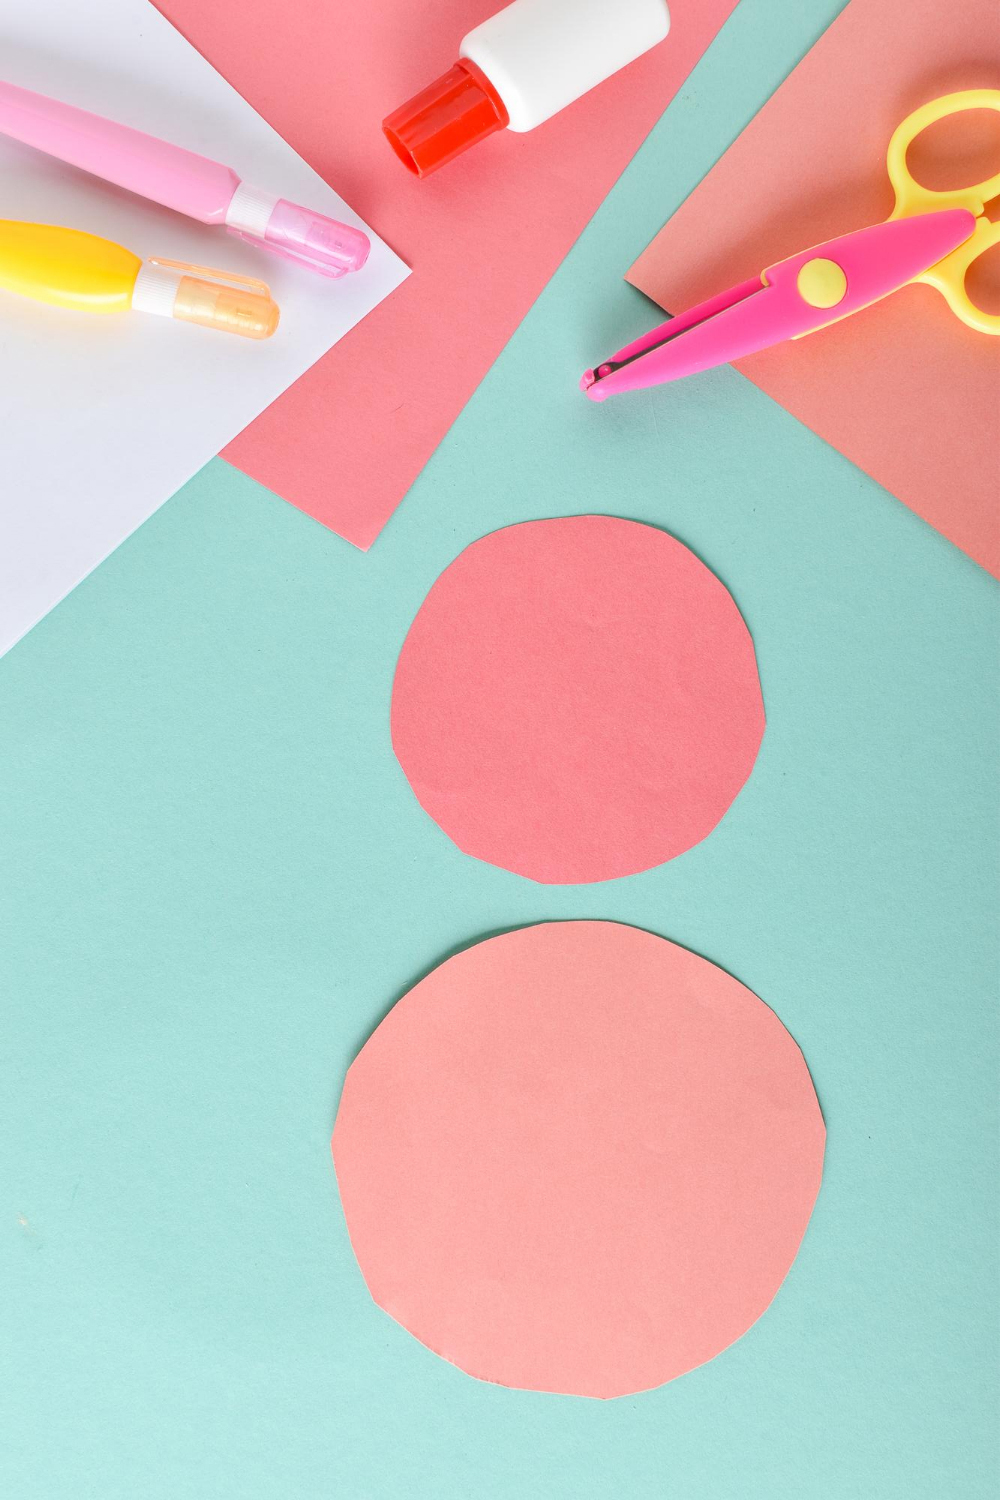 photo of two cut paper circles and other craft materials